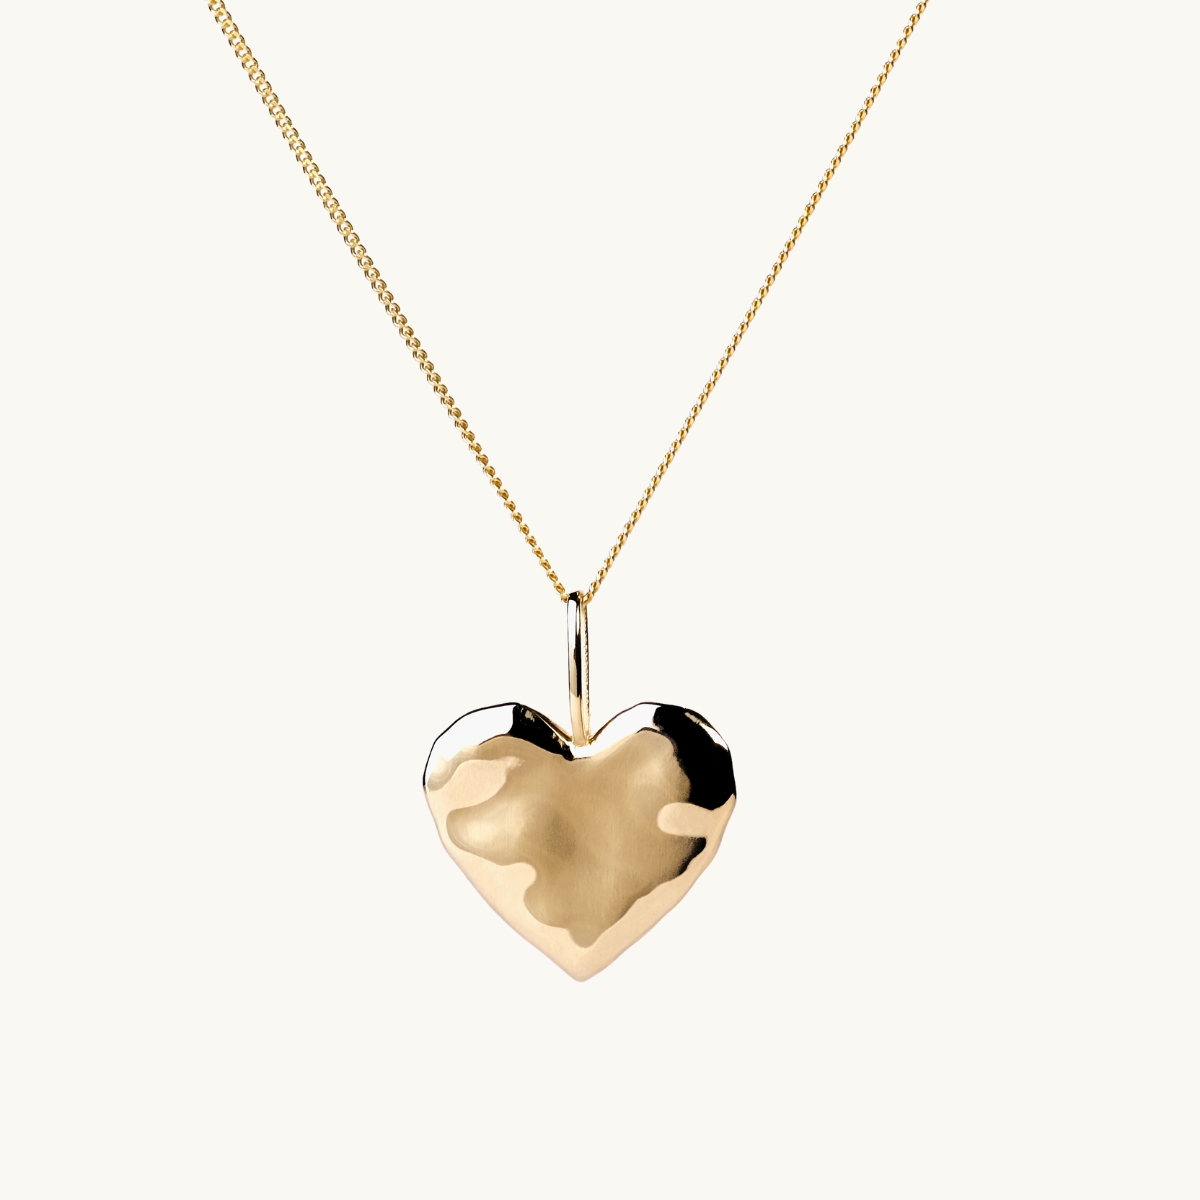 Heart necklace in gold with an organic shape